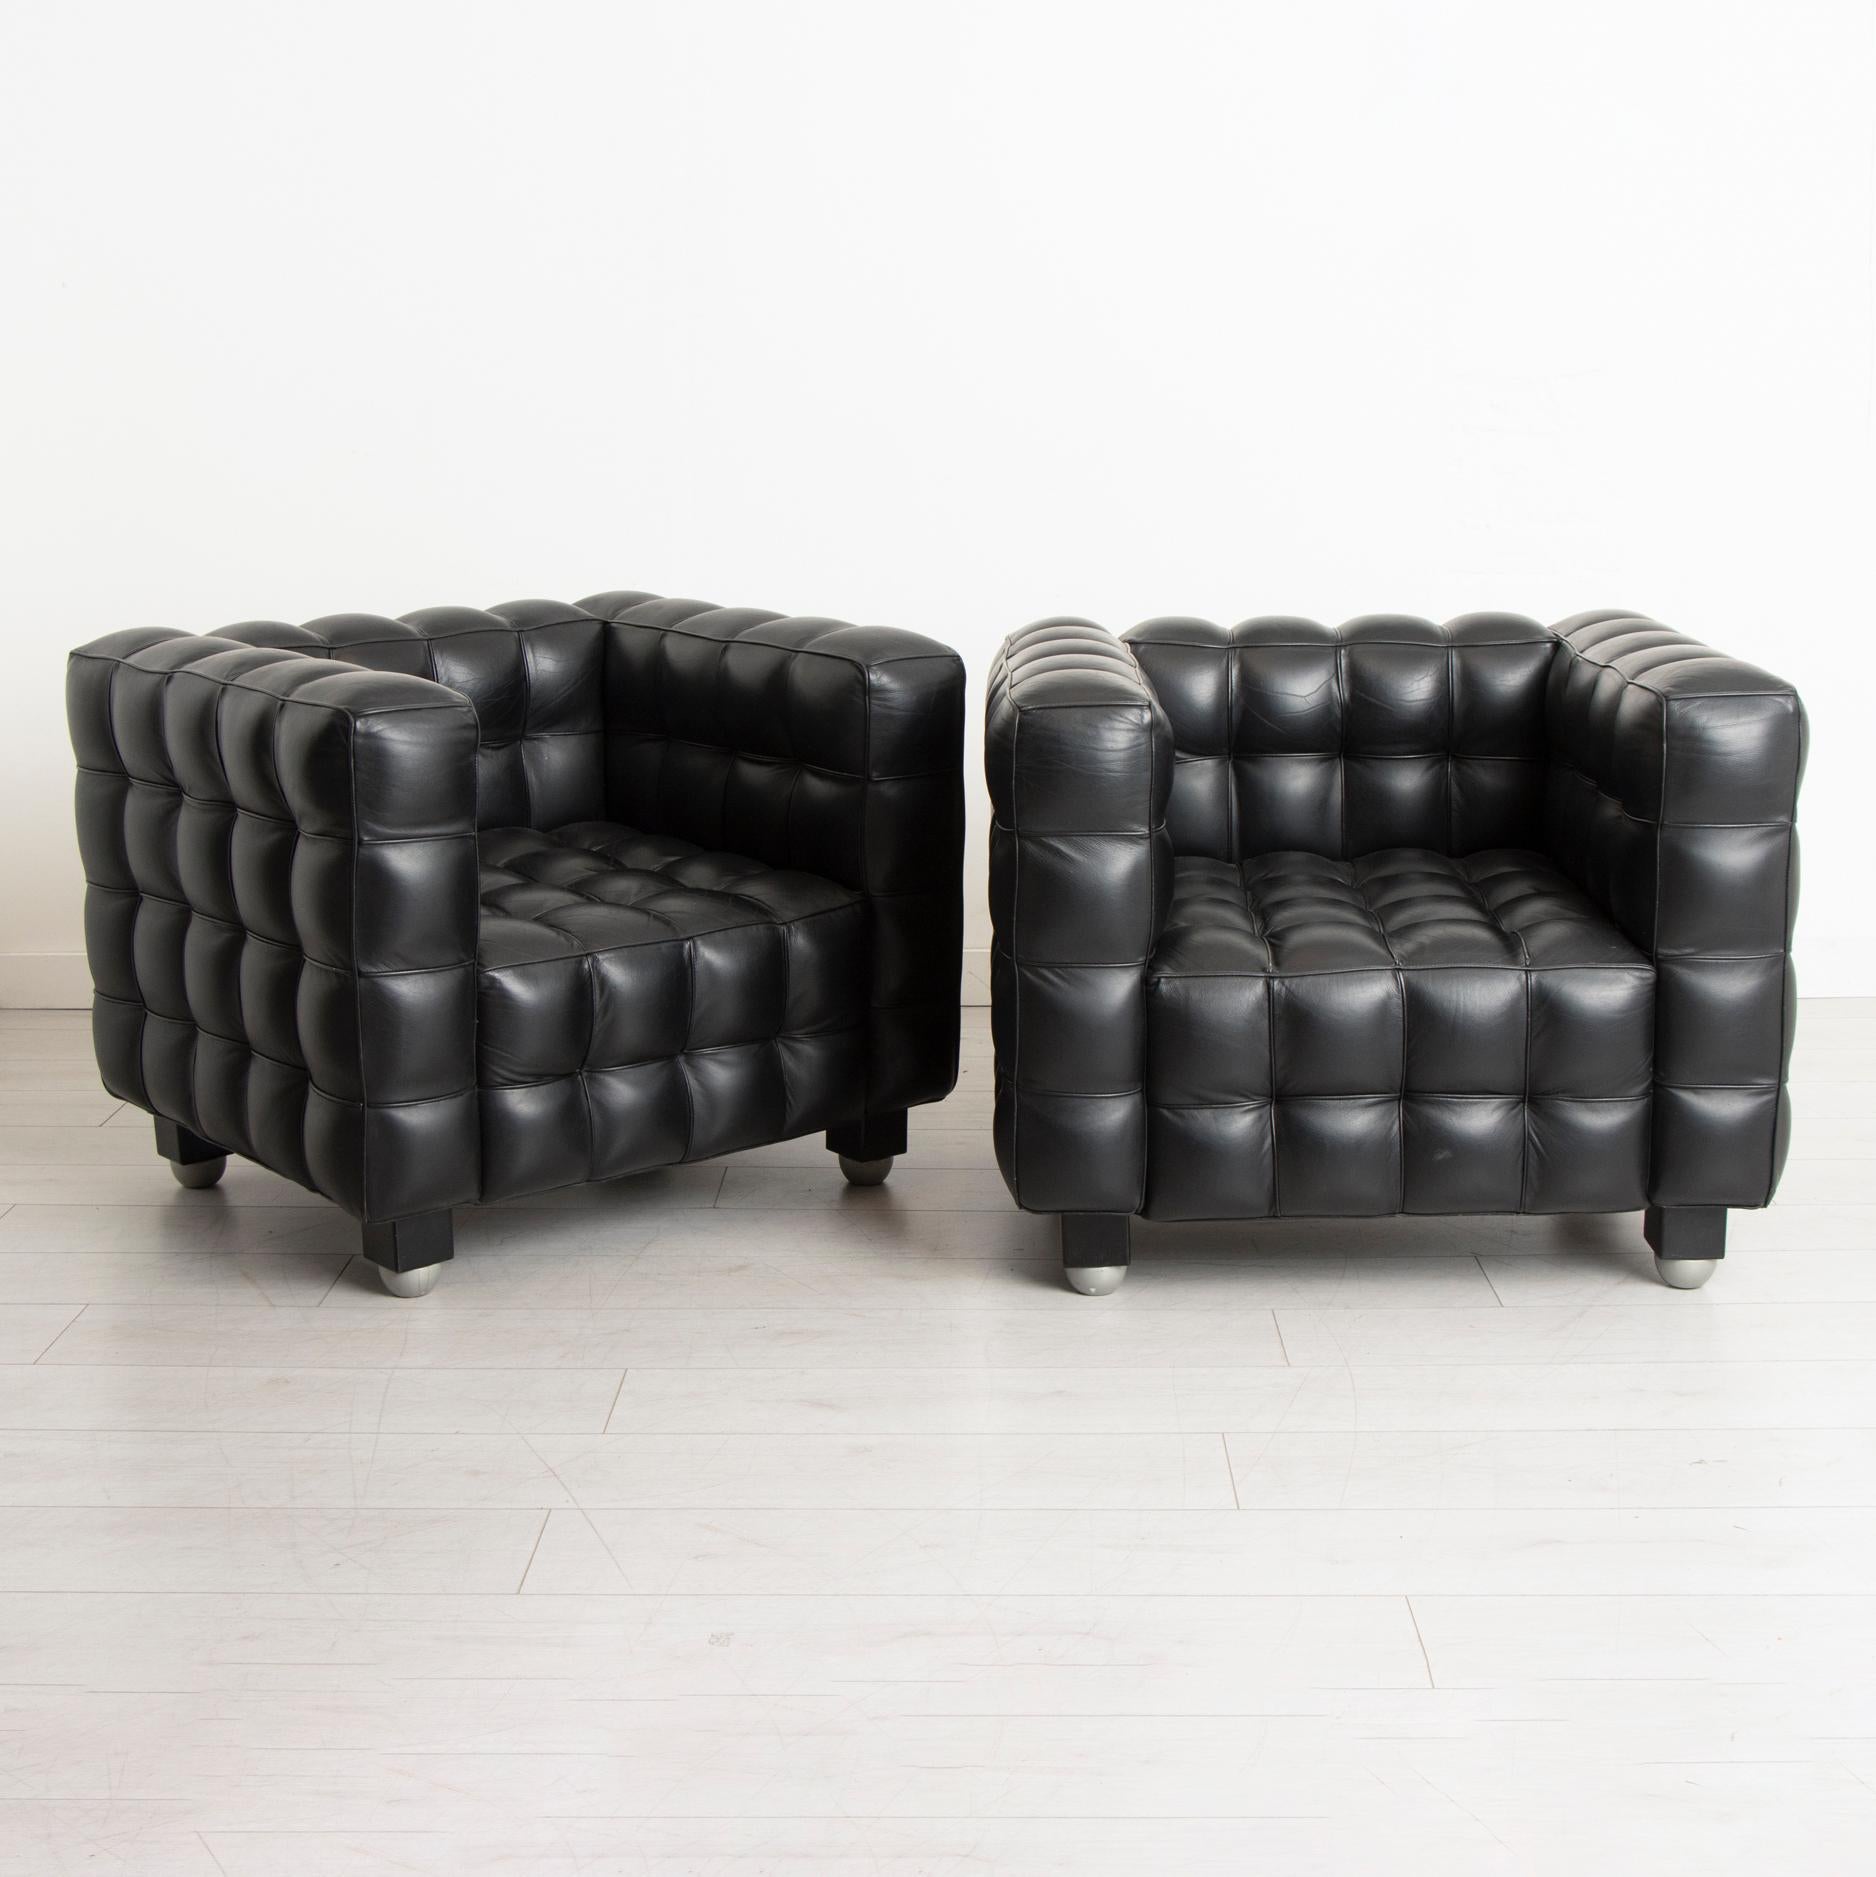 A pair of Kubus black leather armchairs in the manner of Josef Hoffmann circa 1970s. Originally designed by Josef Hoffman in 1910. Very good condition.